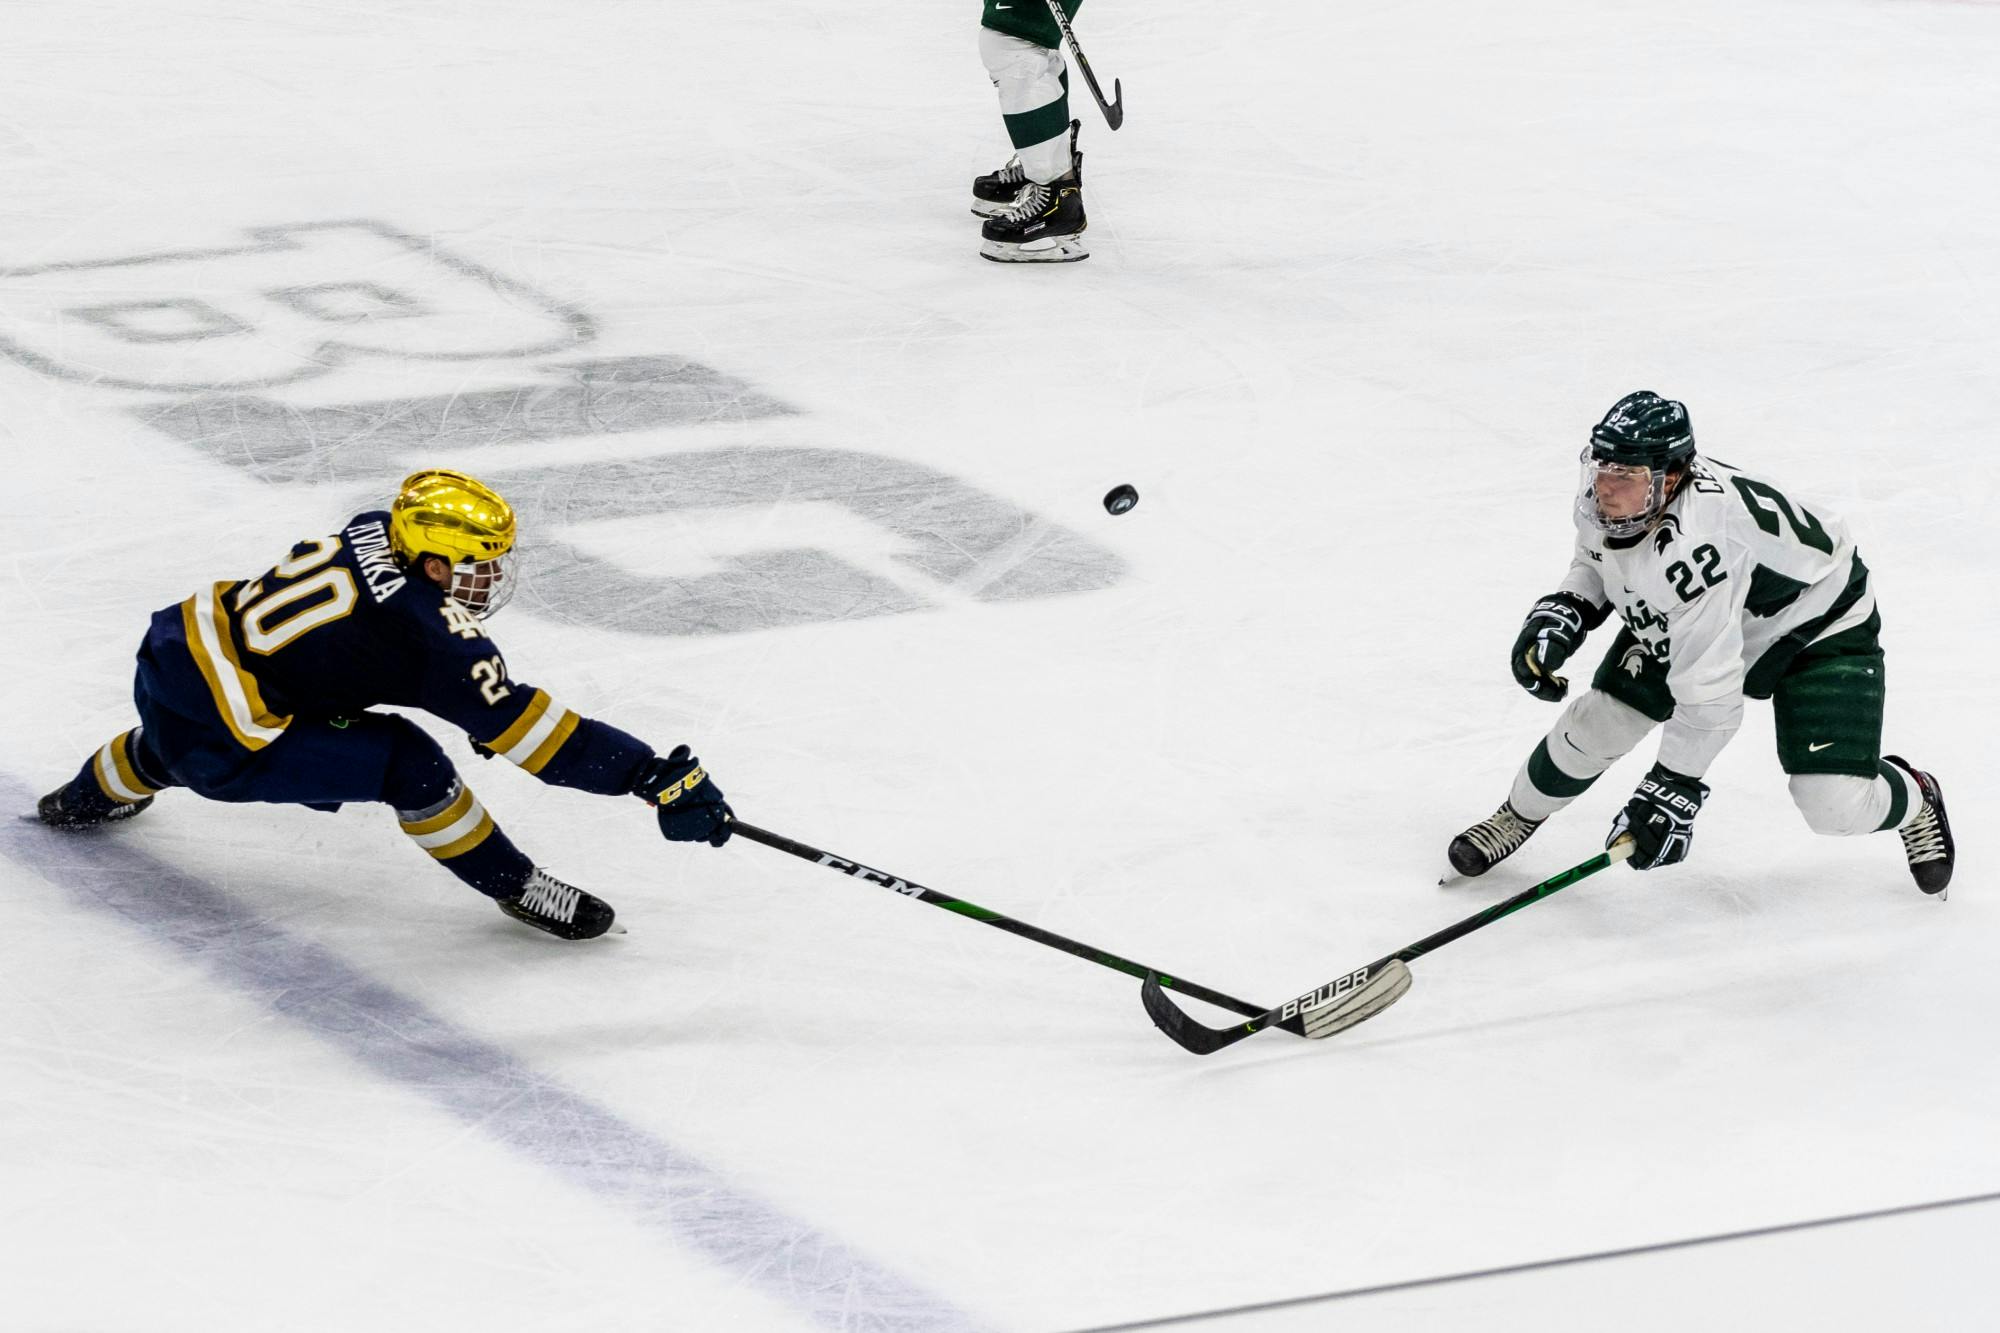 <p>Then-sophomore defender Dennis Cesana (right) and Notre Dame center Jake Pivonka both attempt to bring down the puck. The Spartans tied with the Fighting Irish, 1-1, at Munn Ice Arena on Nov. 22, 2019. </p>